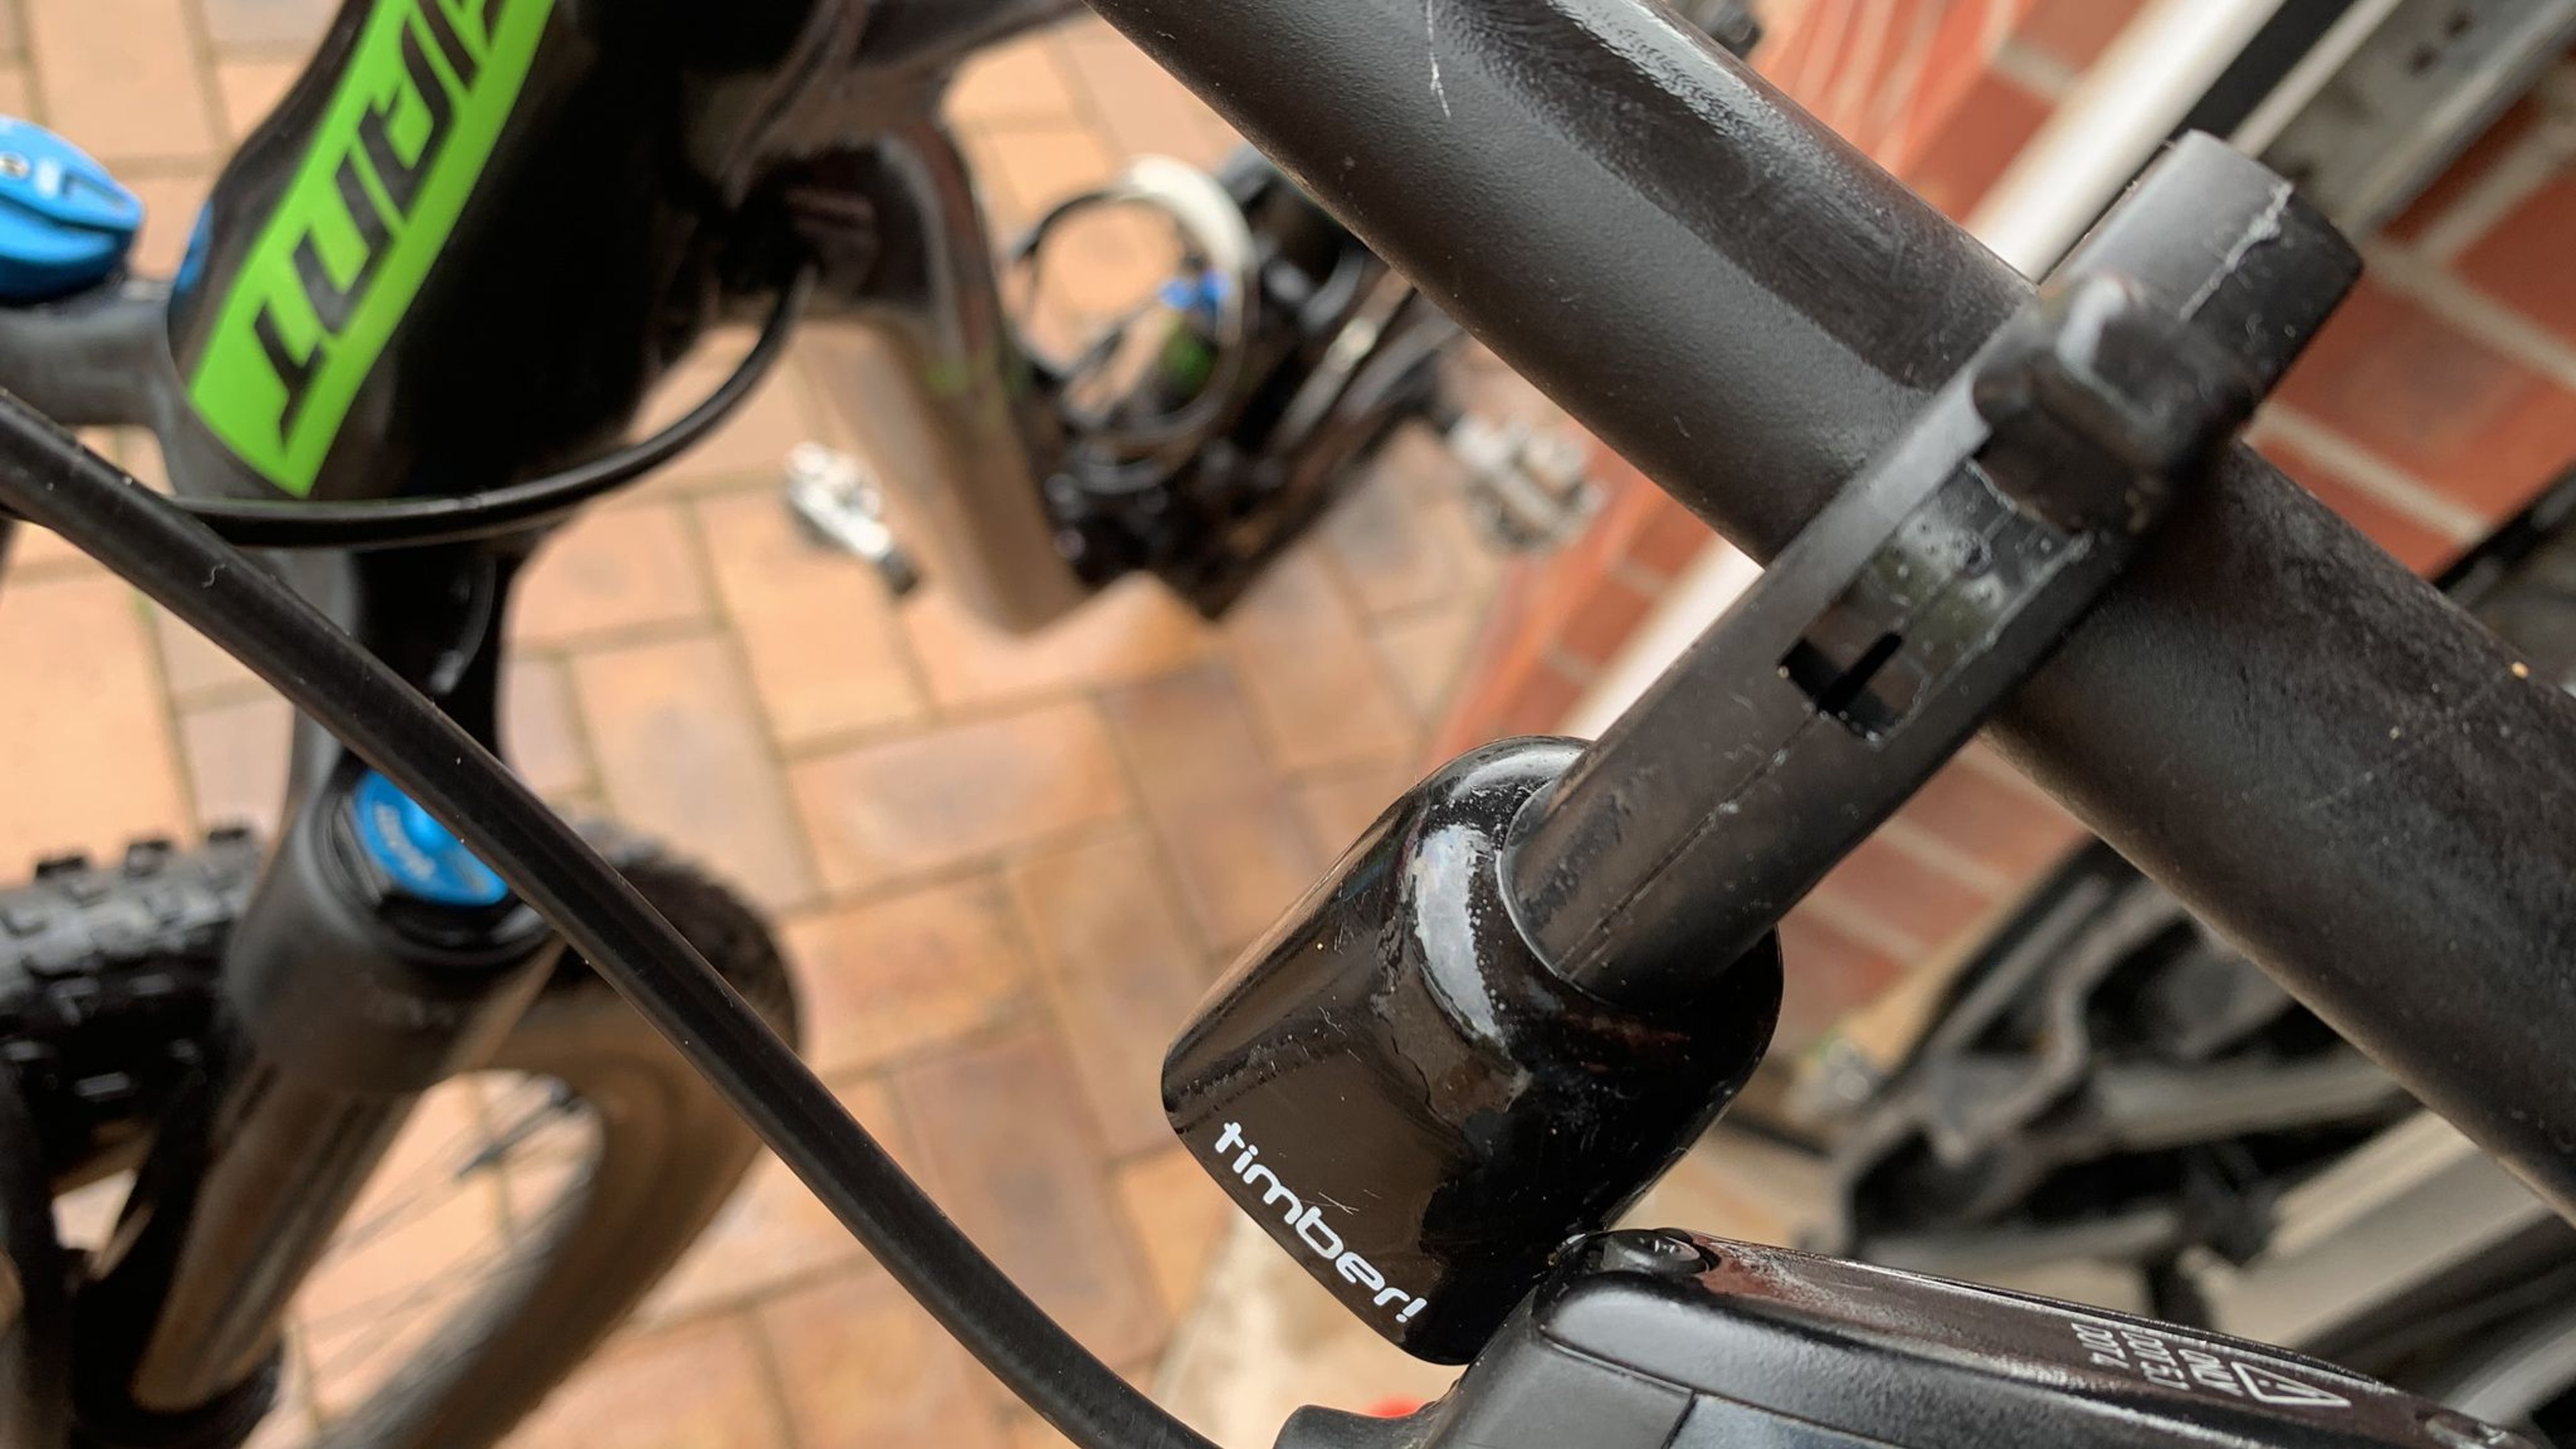 The Timber Mountain Bike bell fitted on my bike